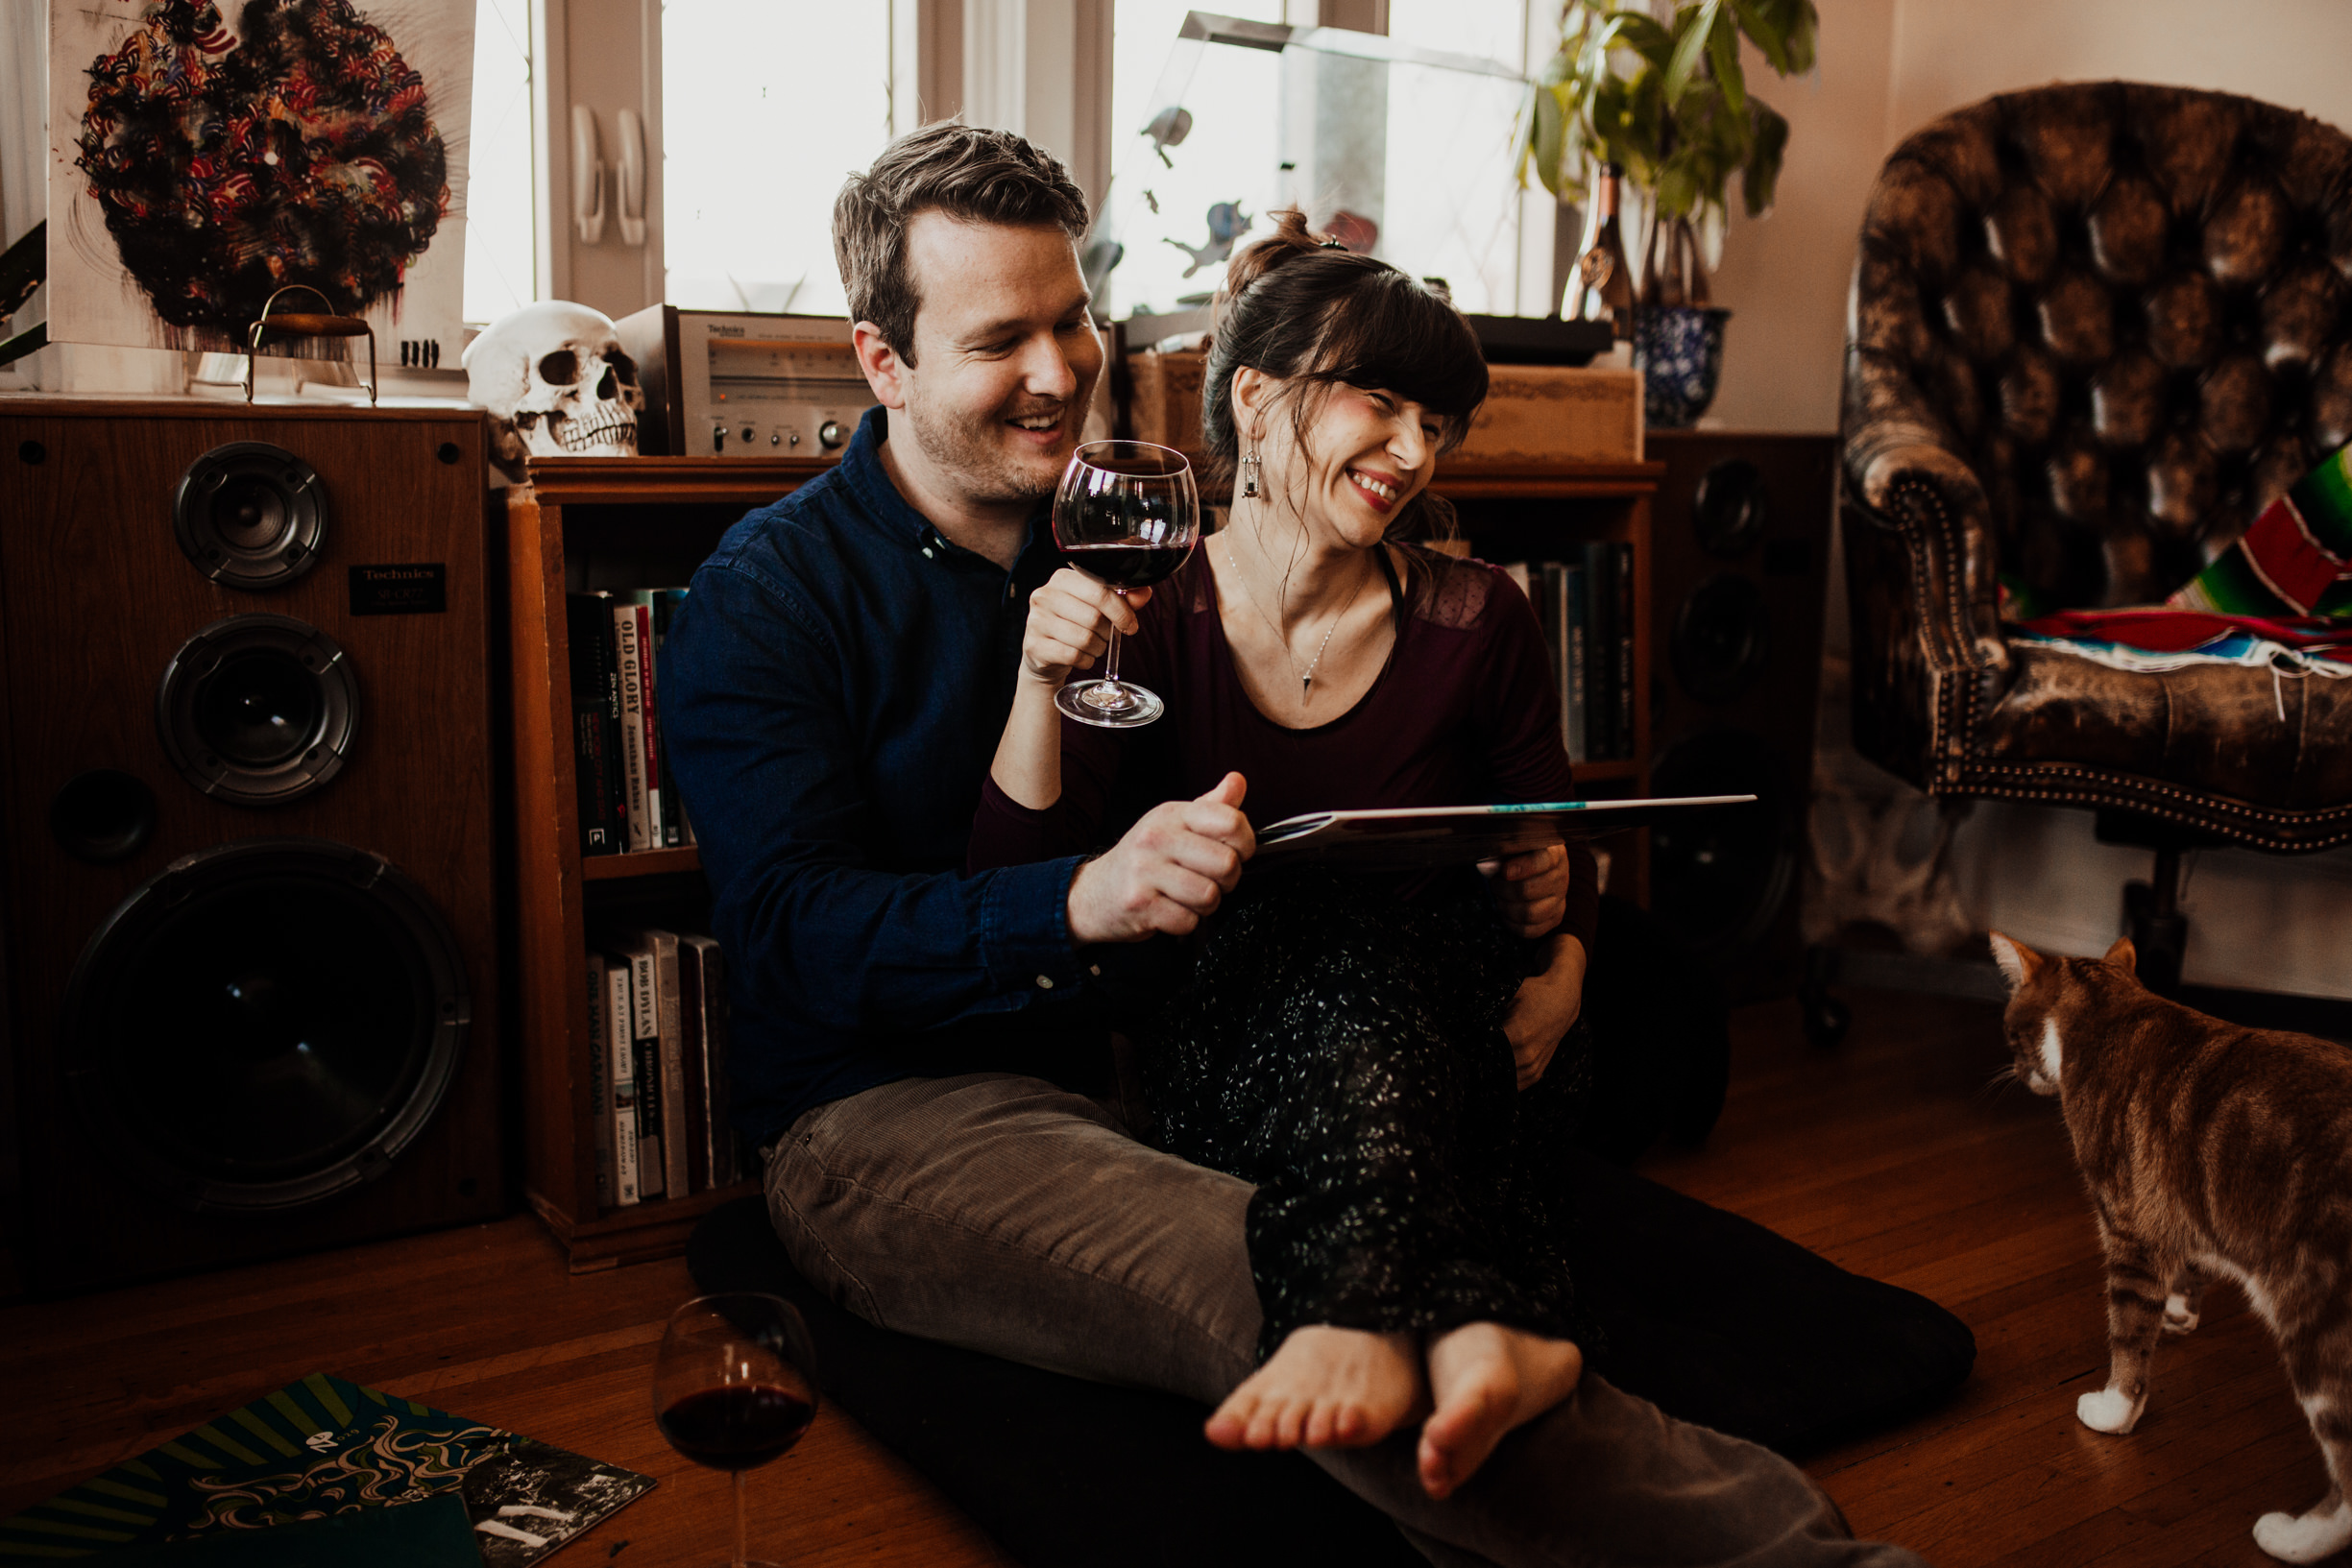 louisville-engagement-photographer-record-store-in-home-session-crystal-ludwick-photo (23 of 53).jpg